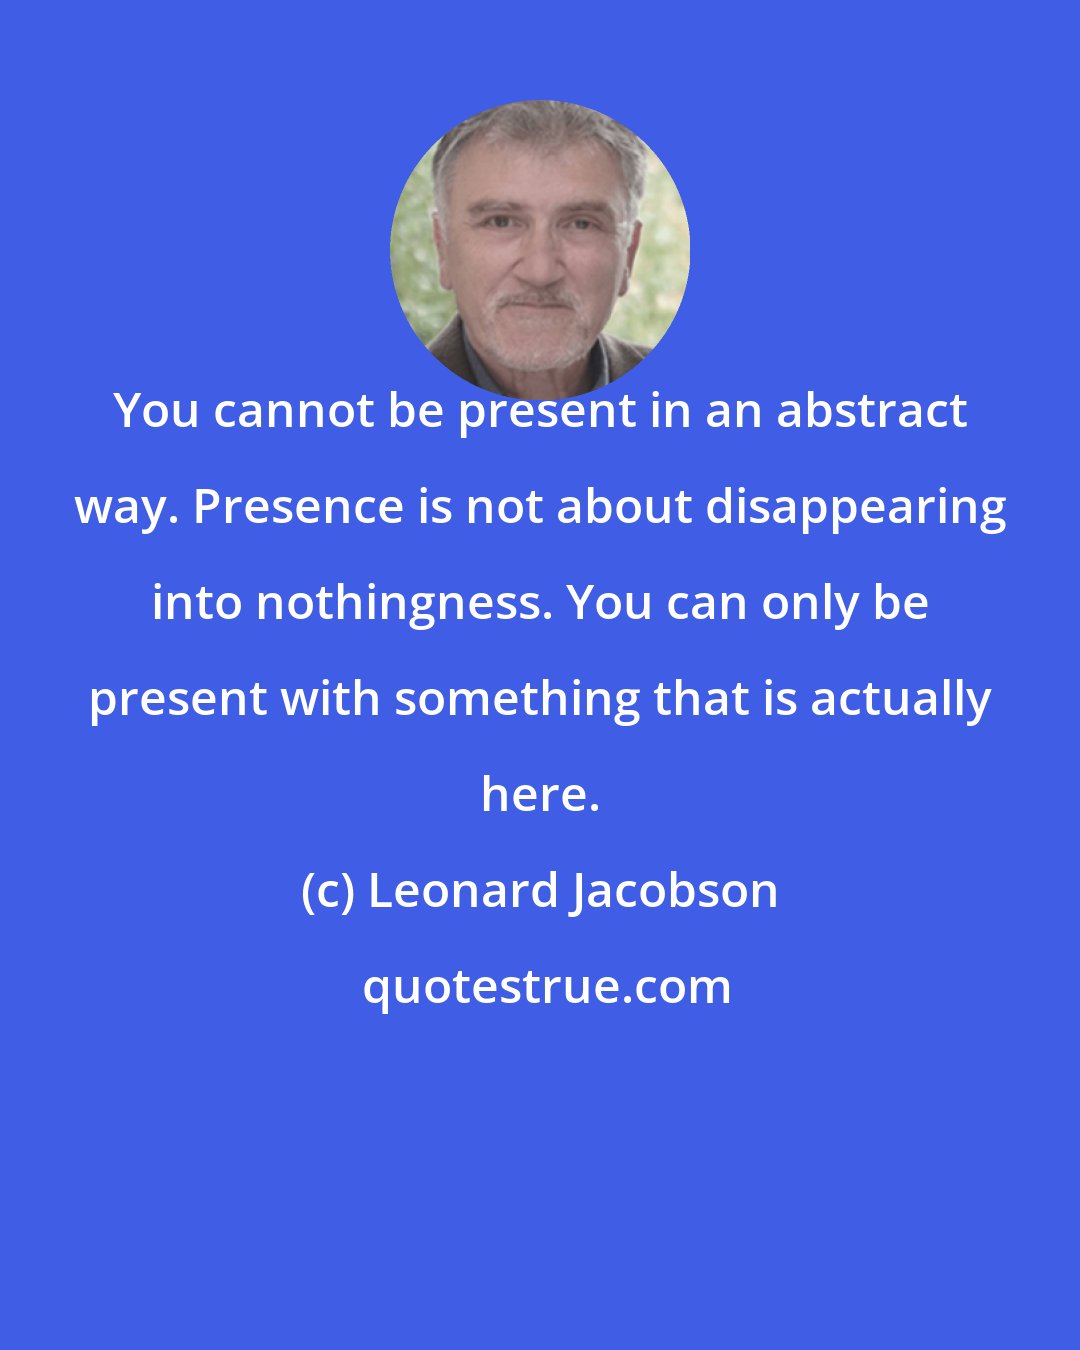 Leonard Jacobson: You cannot be present in an abstract way. Presence is not about disappearing into nothingness. You can only be present with something that is actually here.